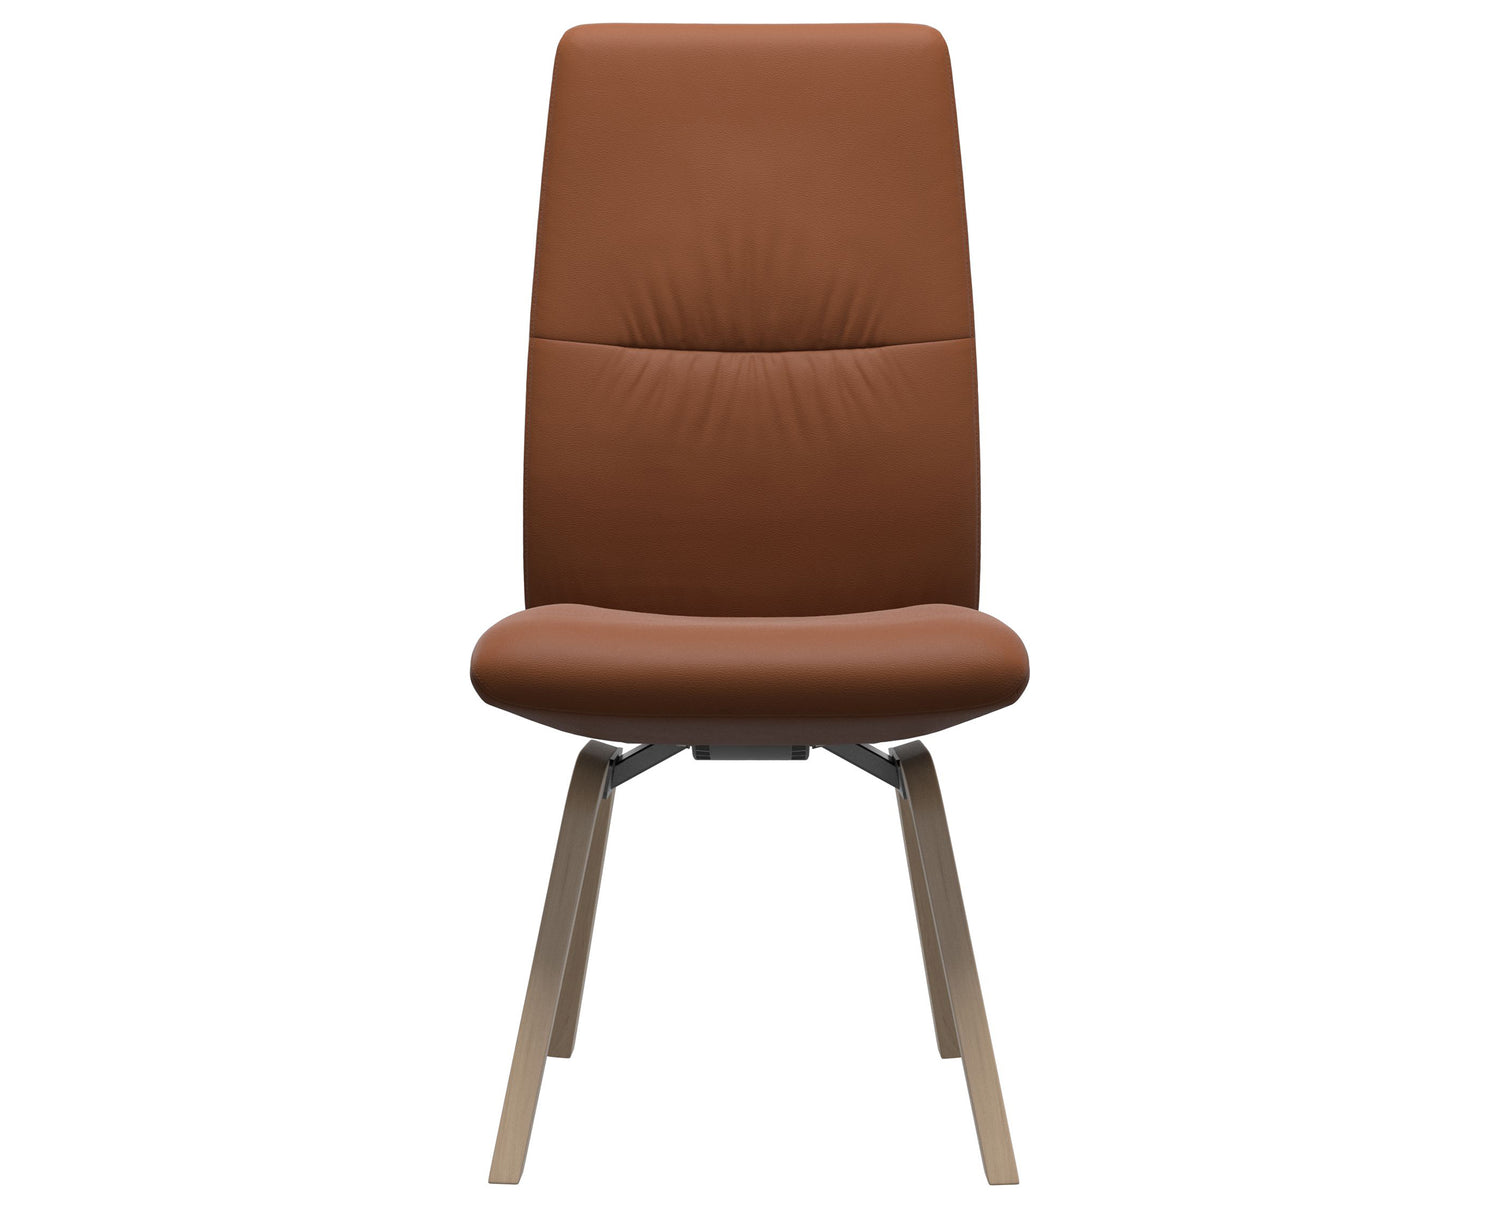 Paloma Leather New Cognac & Natural Base | Stressless Mint High Back D200 Dining Chair | Valley Ridge Furniture